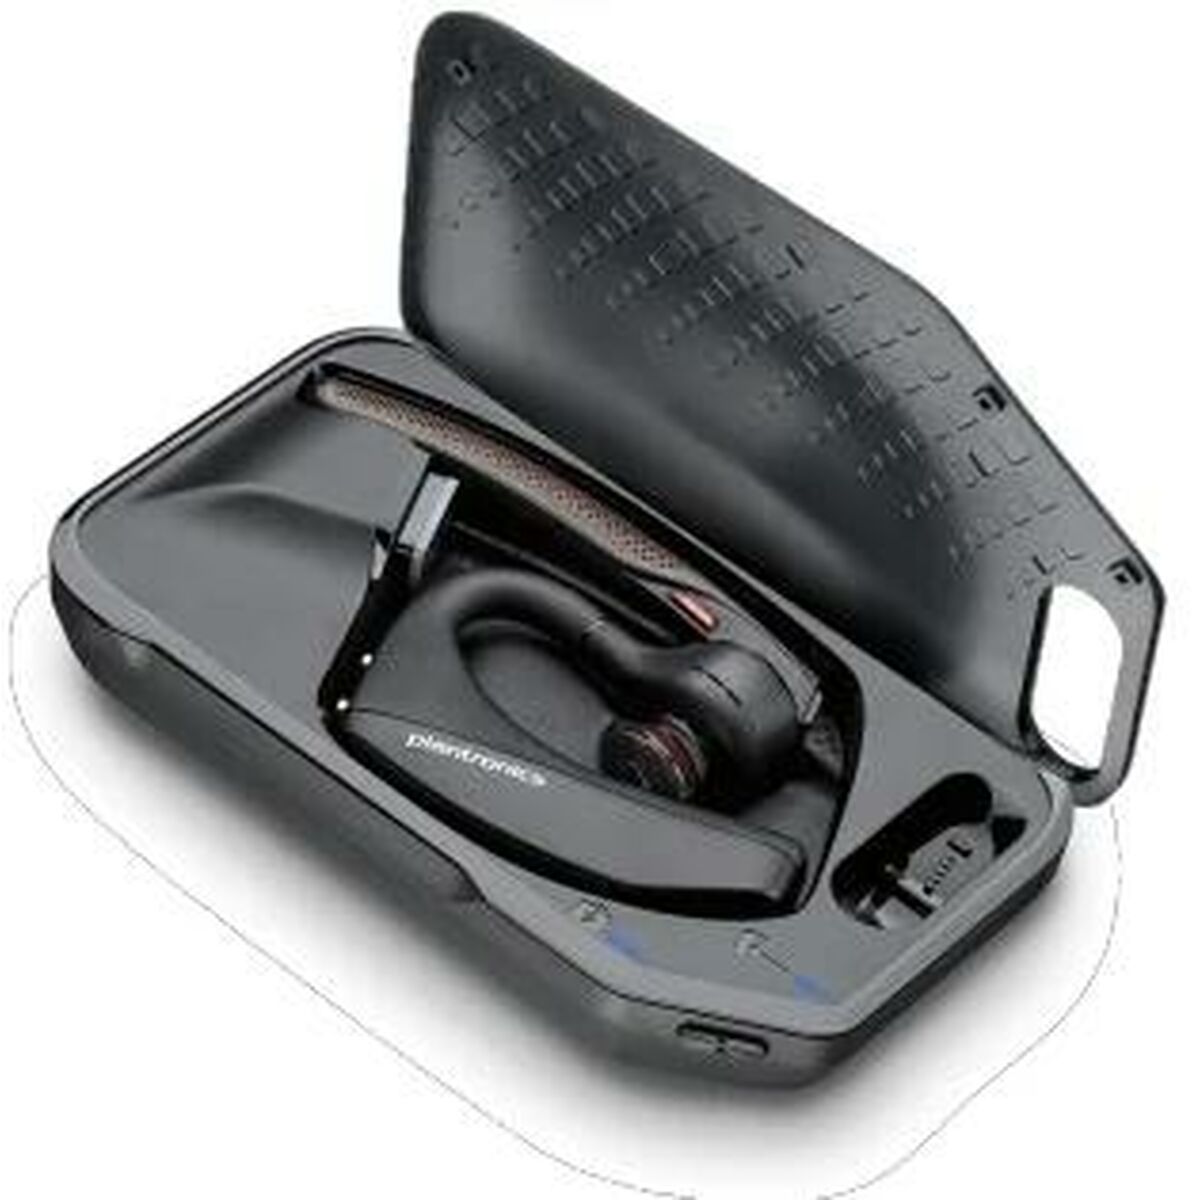 Bluetooth Headset with Microphone Poly Voyager 5200 Black